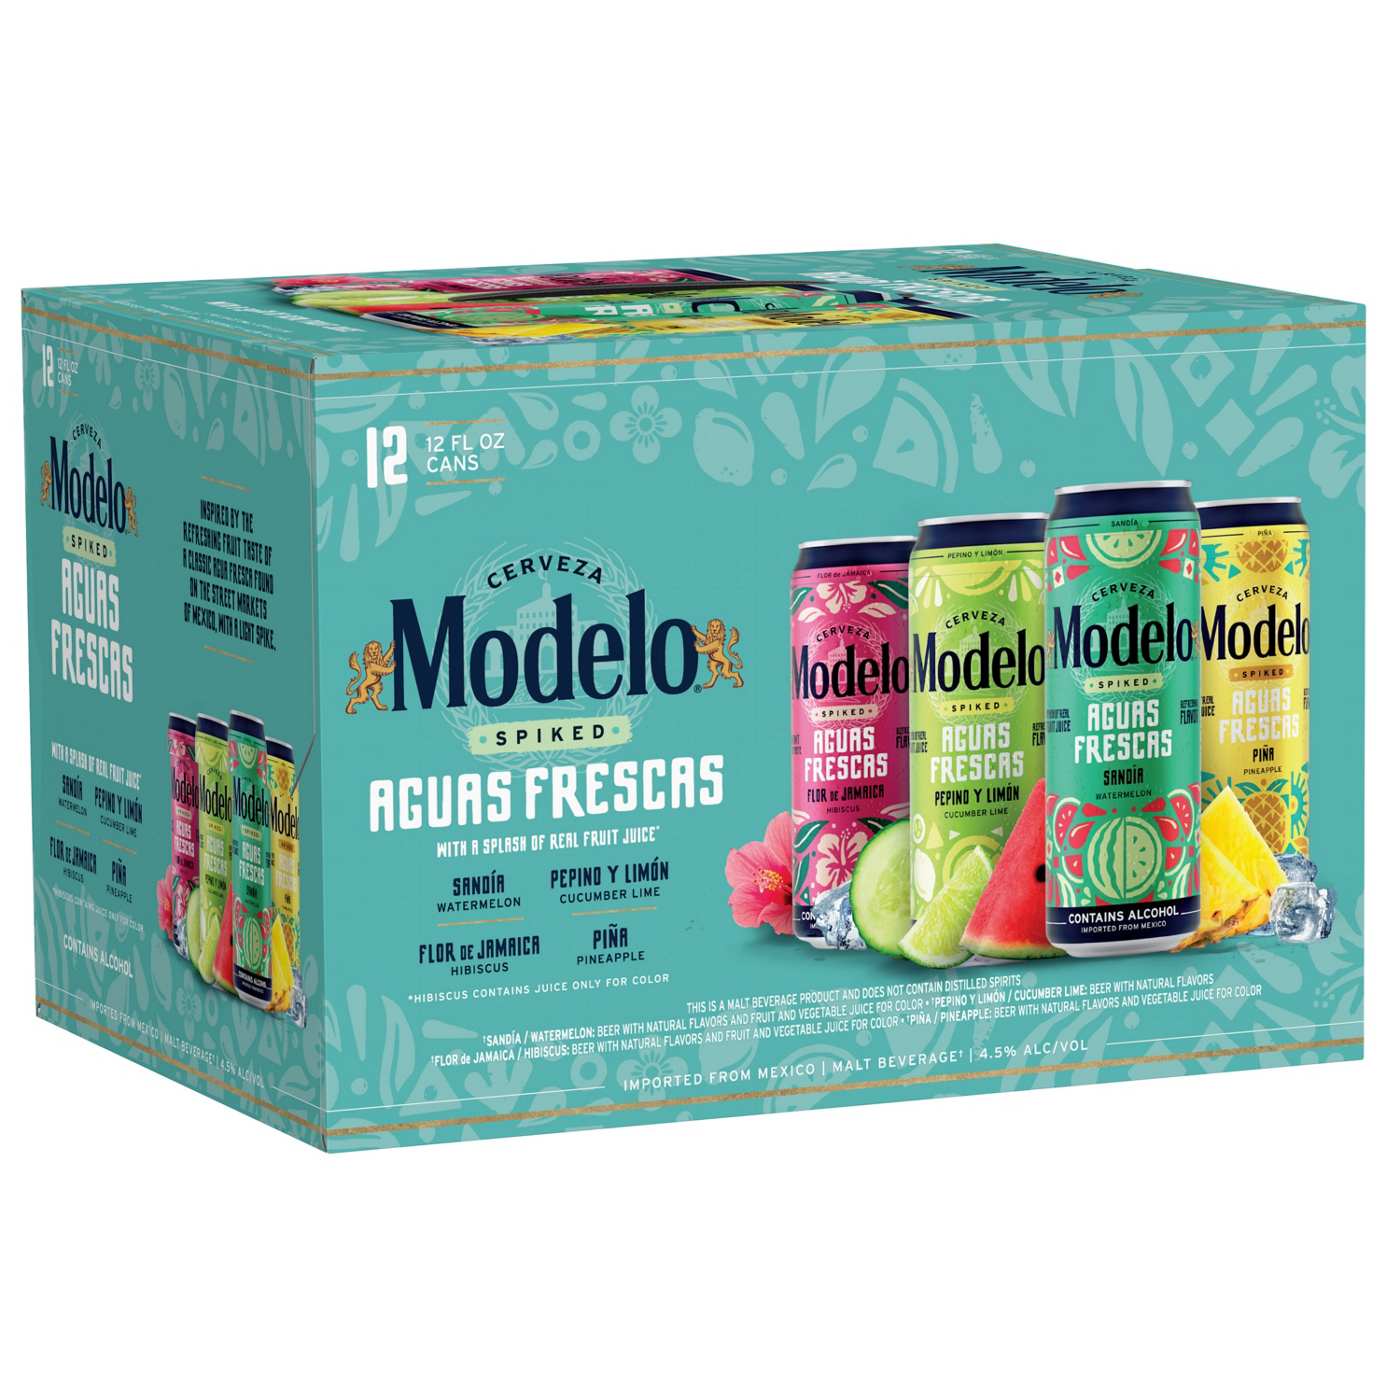 Modelo Spiked Aguas Frescas Spiked Frescas Variety Pack 12 pk Cans; image 1 of 8